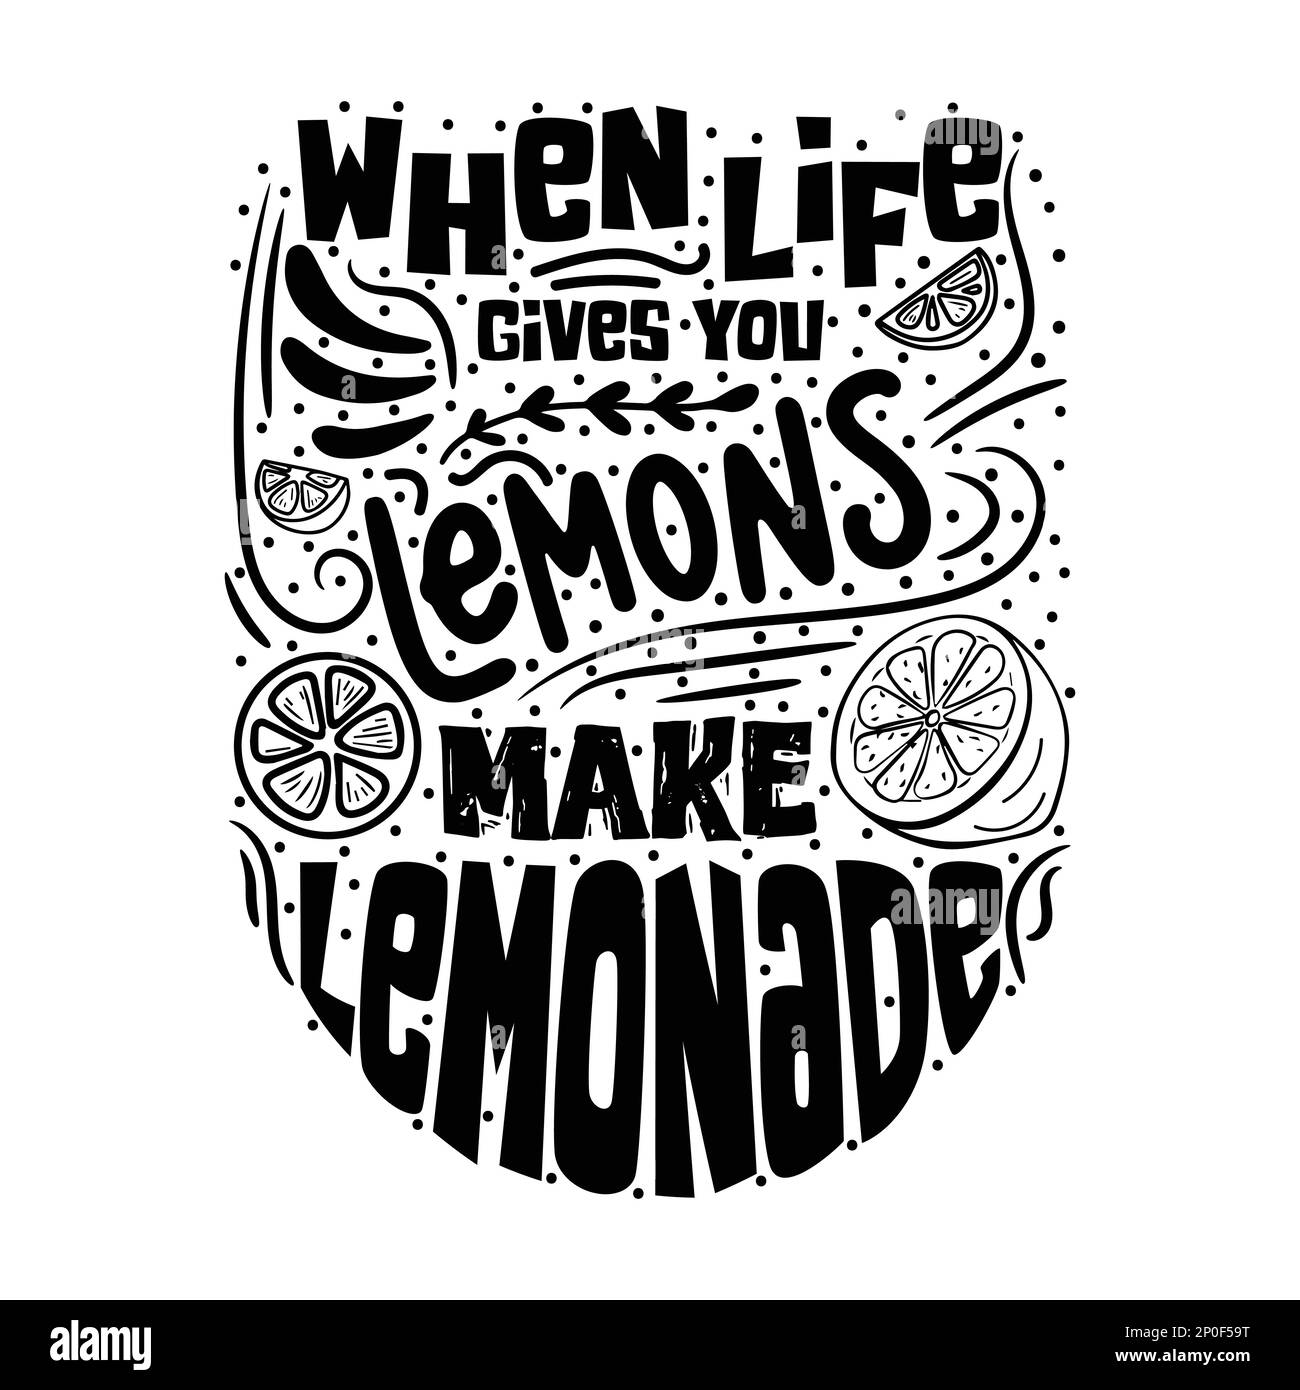 Typography background with quote - when life gives you lemons make lemonade. Inspirational motivation vector illustration Stock Vector